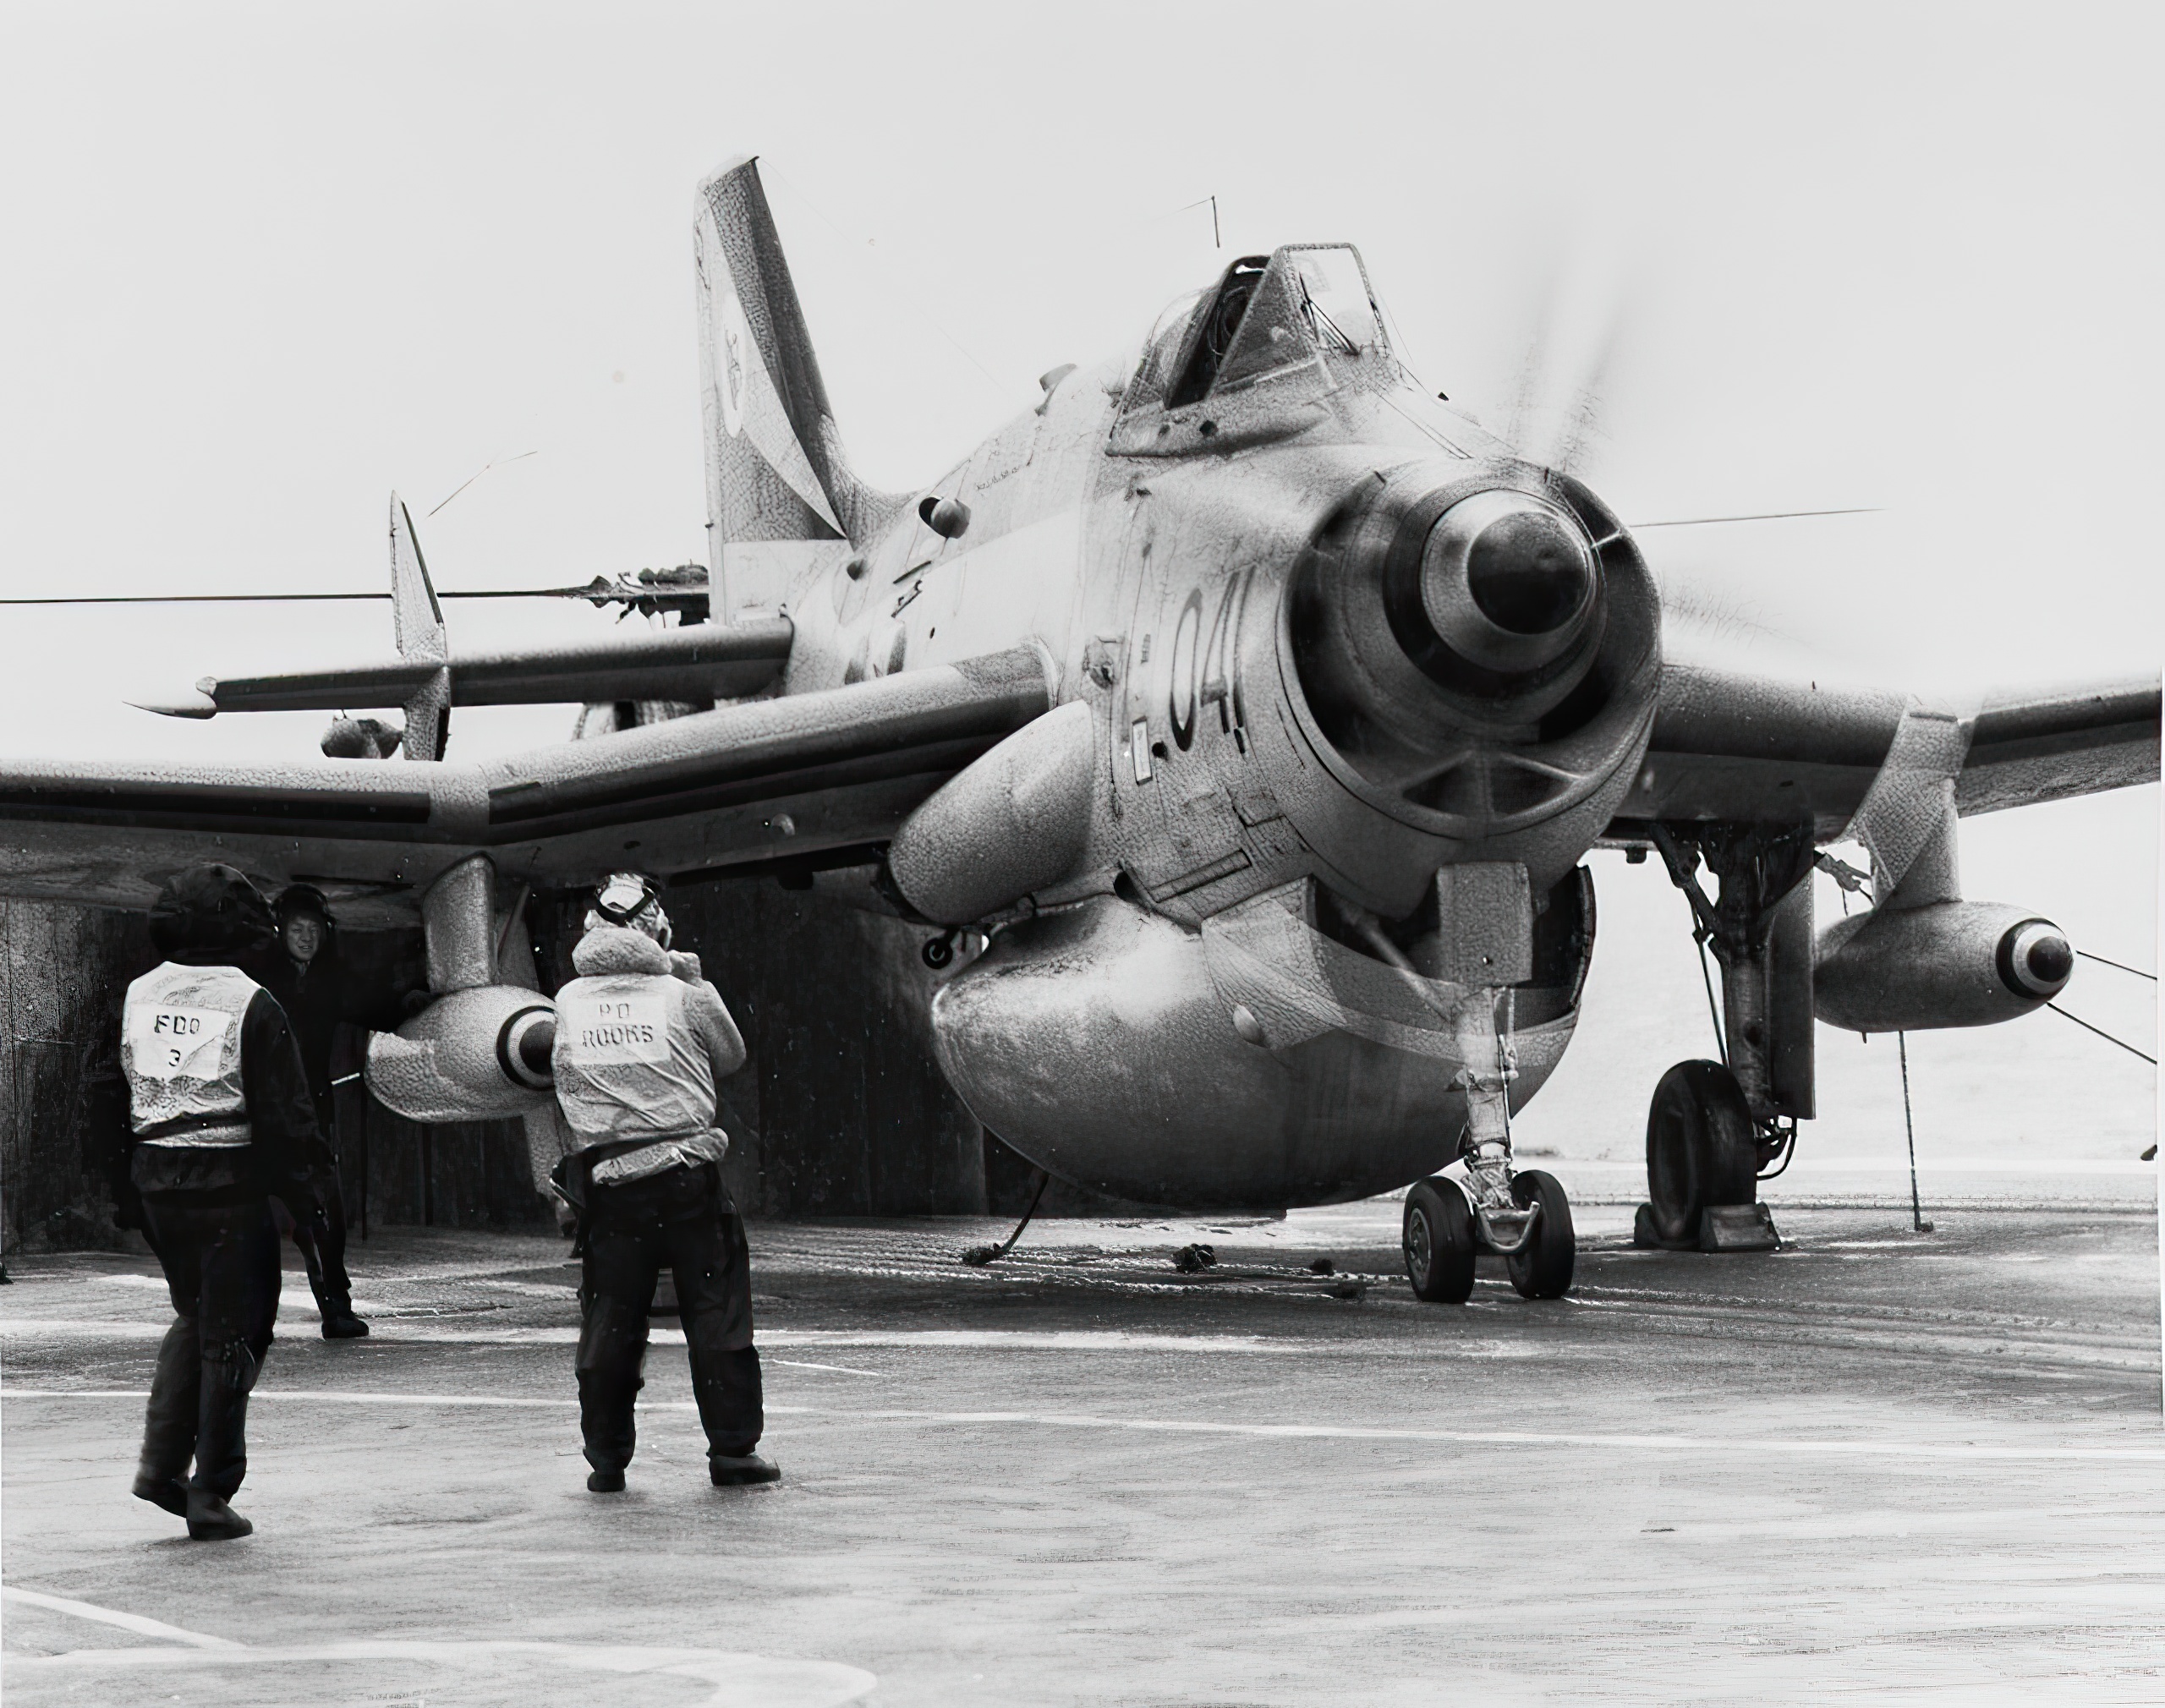 Fairey Gannet AEW-3 (041) On board HMS Ark Royal during exercise Northern Wedding 78, Phase II, in the north Atlantic, 1 September 1978